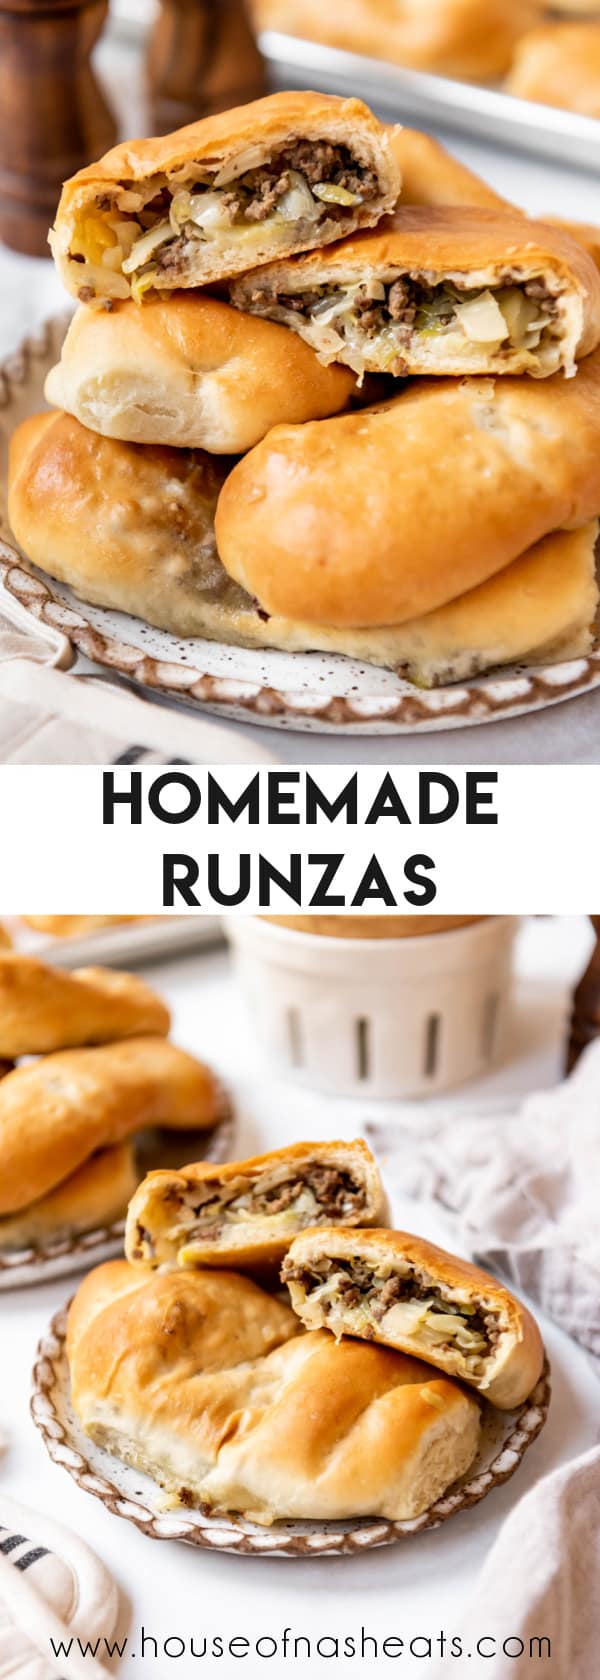 A collage of images of runzas on a plate with text overlay.